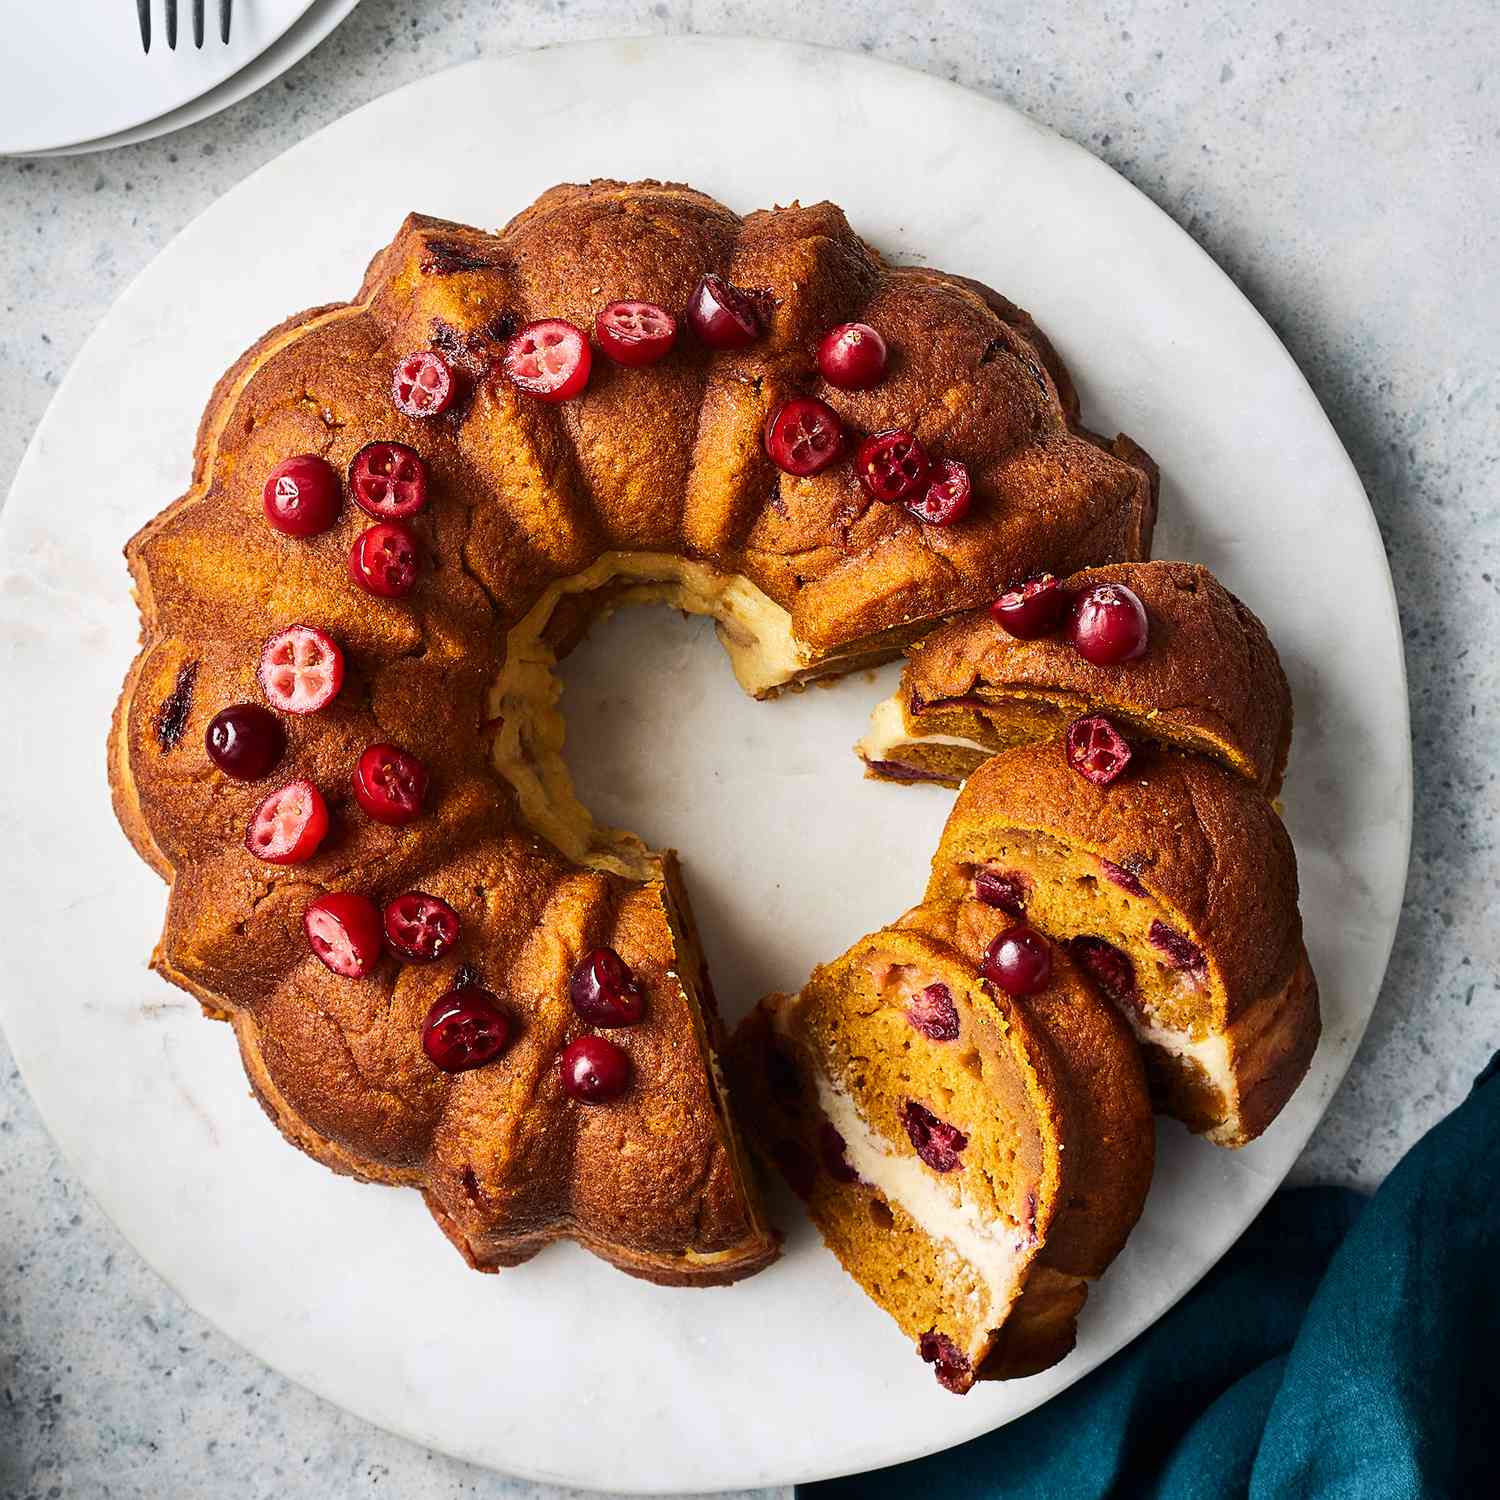 Pumpkin-Cranberry Bundt Cake with Cream Cheese Filling